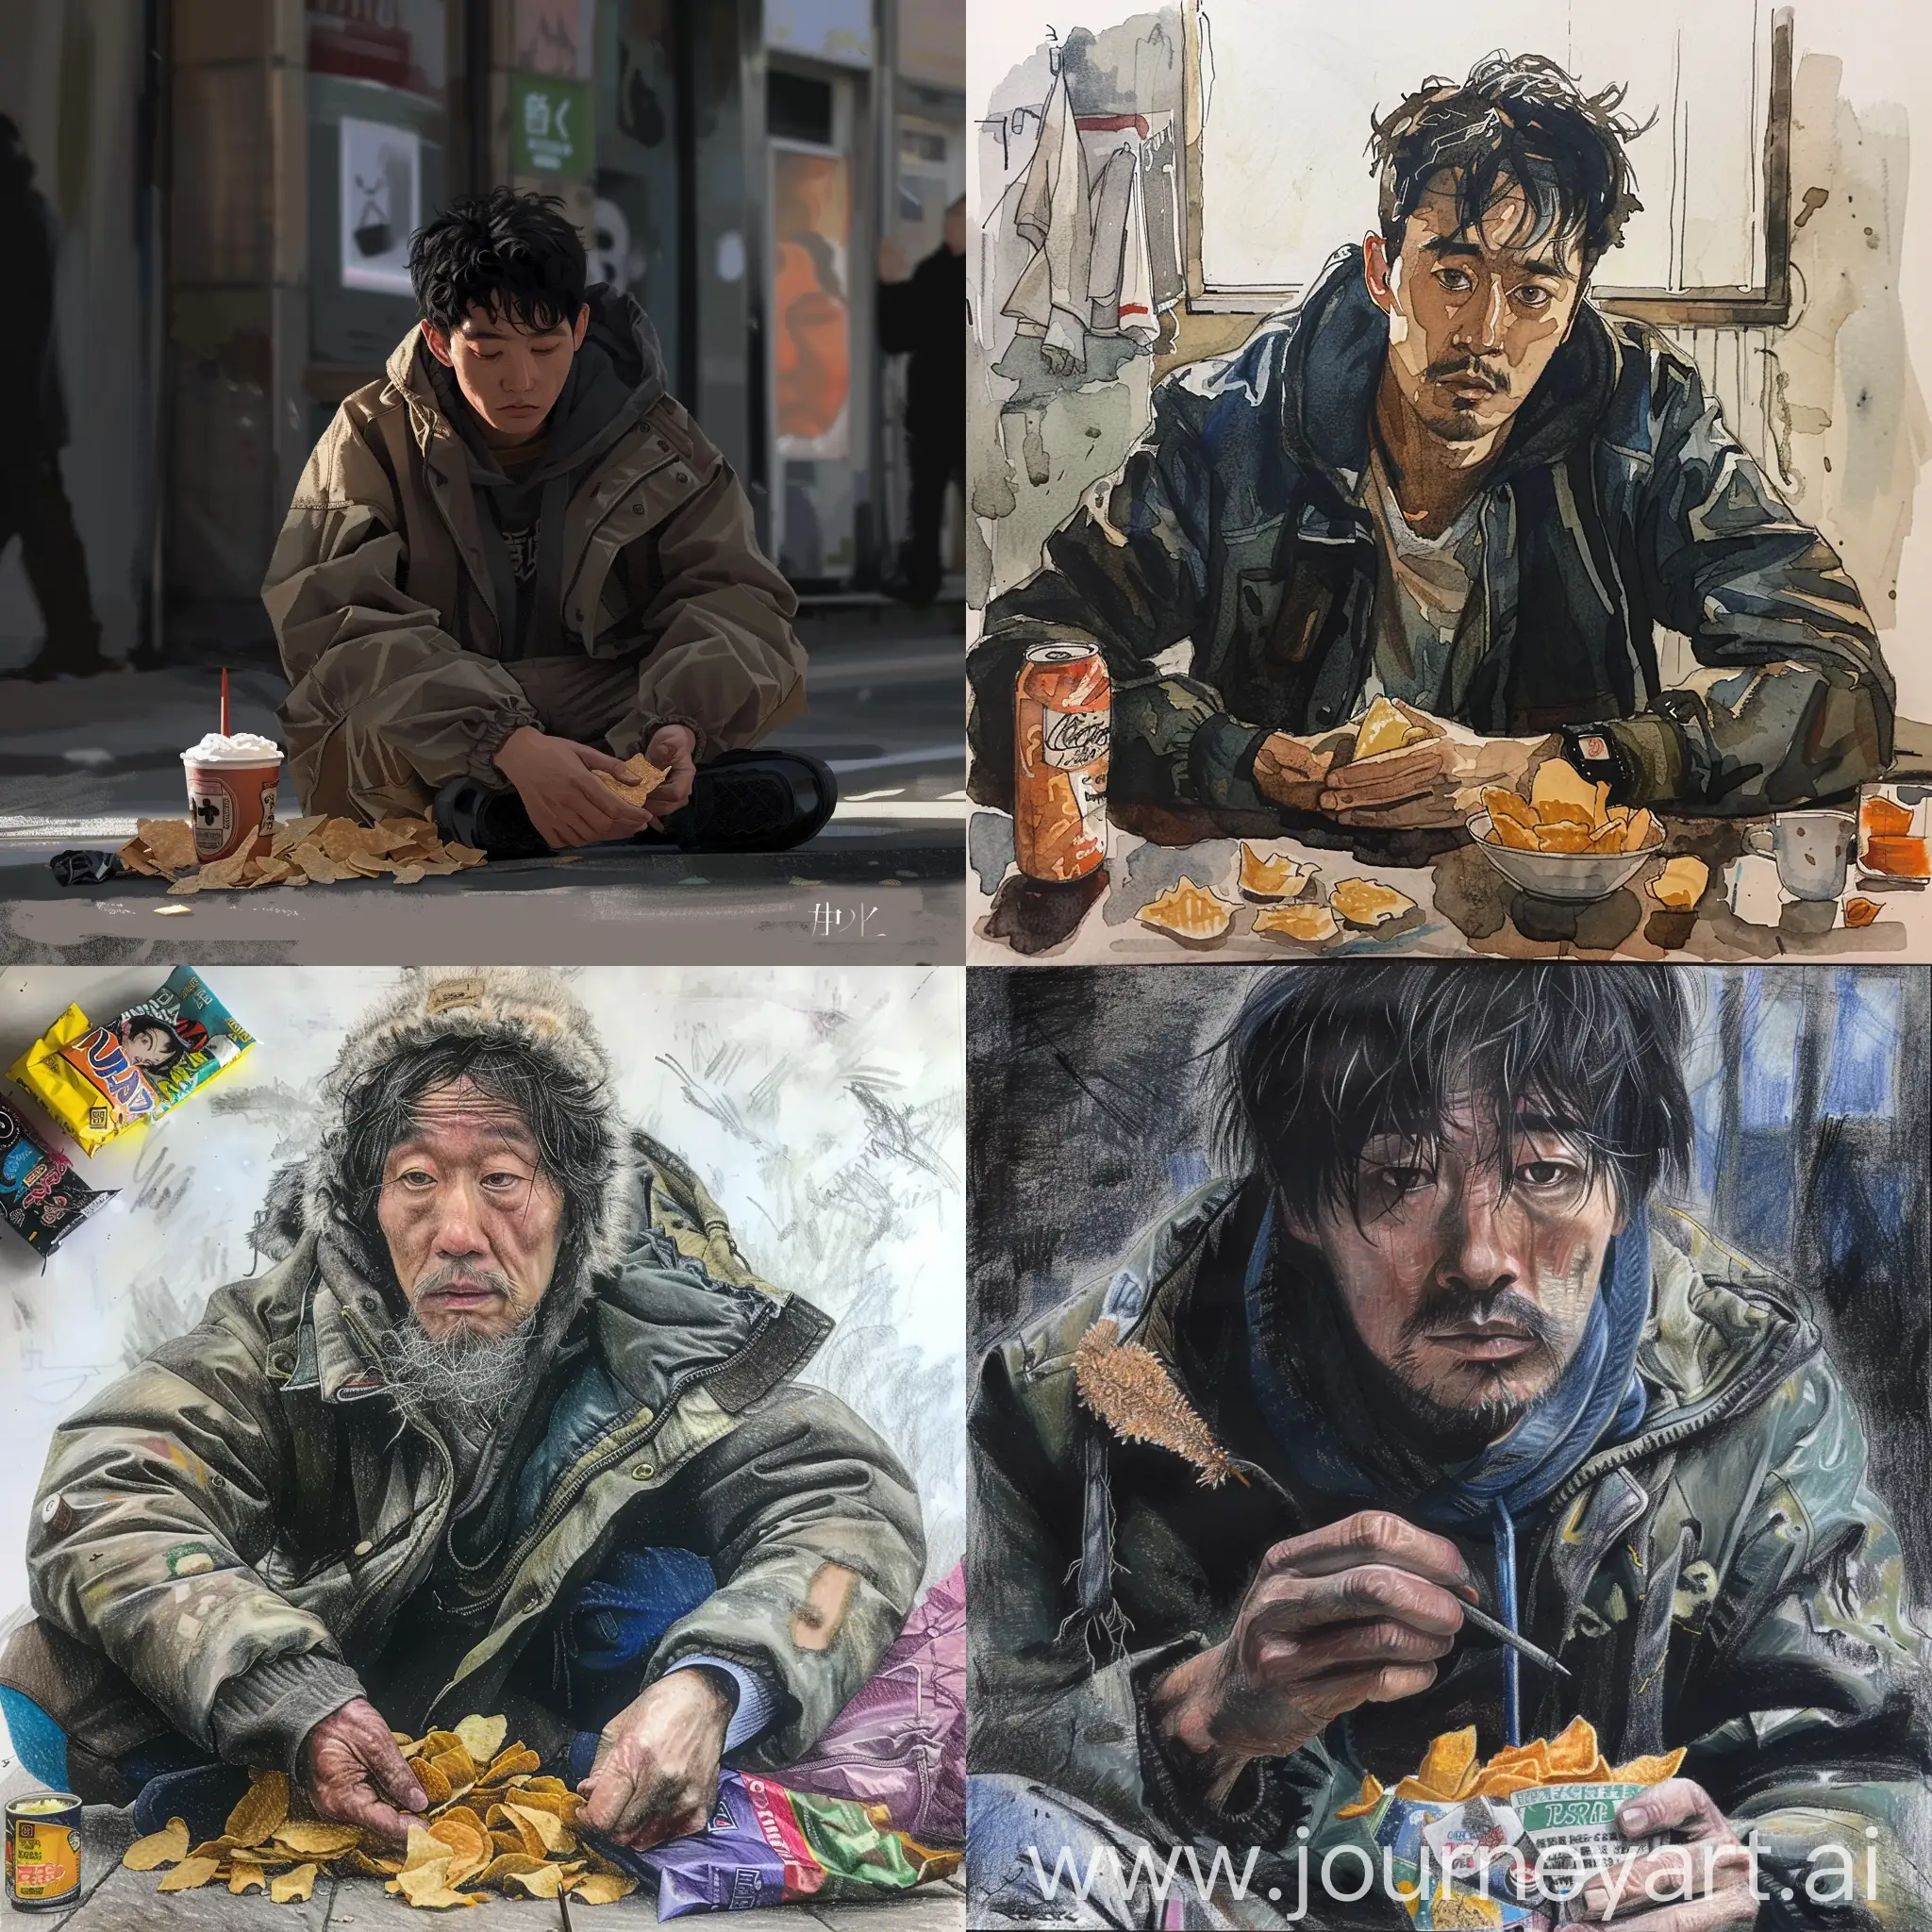 draw an Asian man who constantly watches anime, eats chips and lives on the street